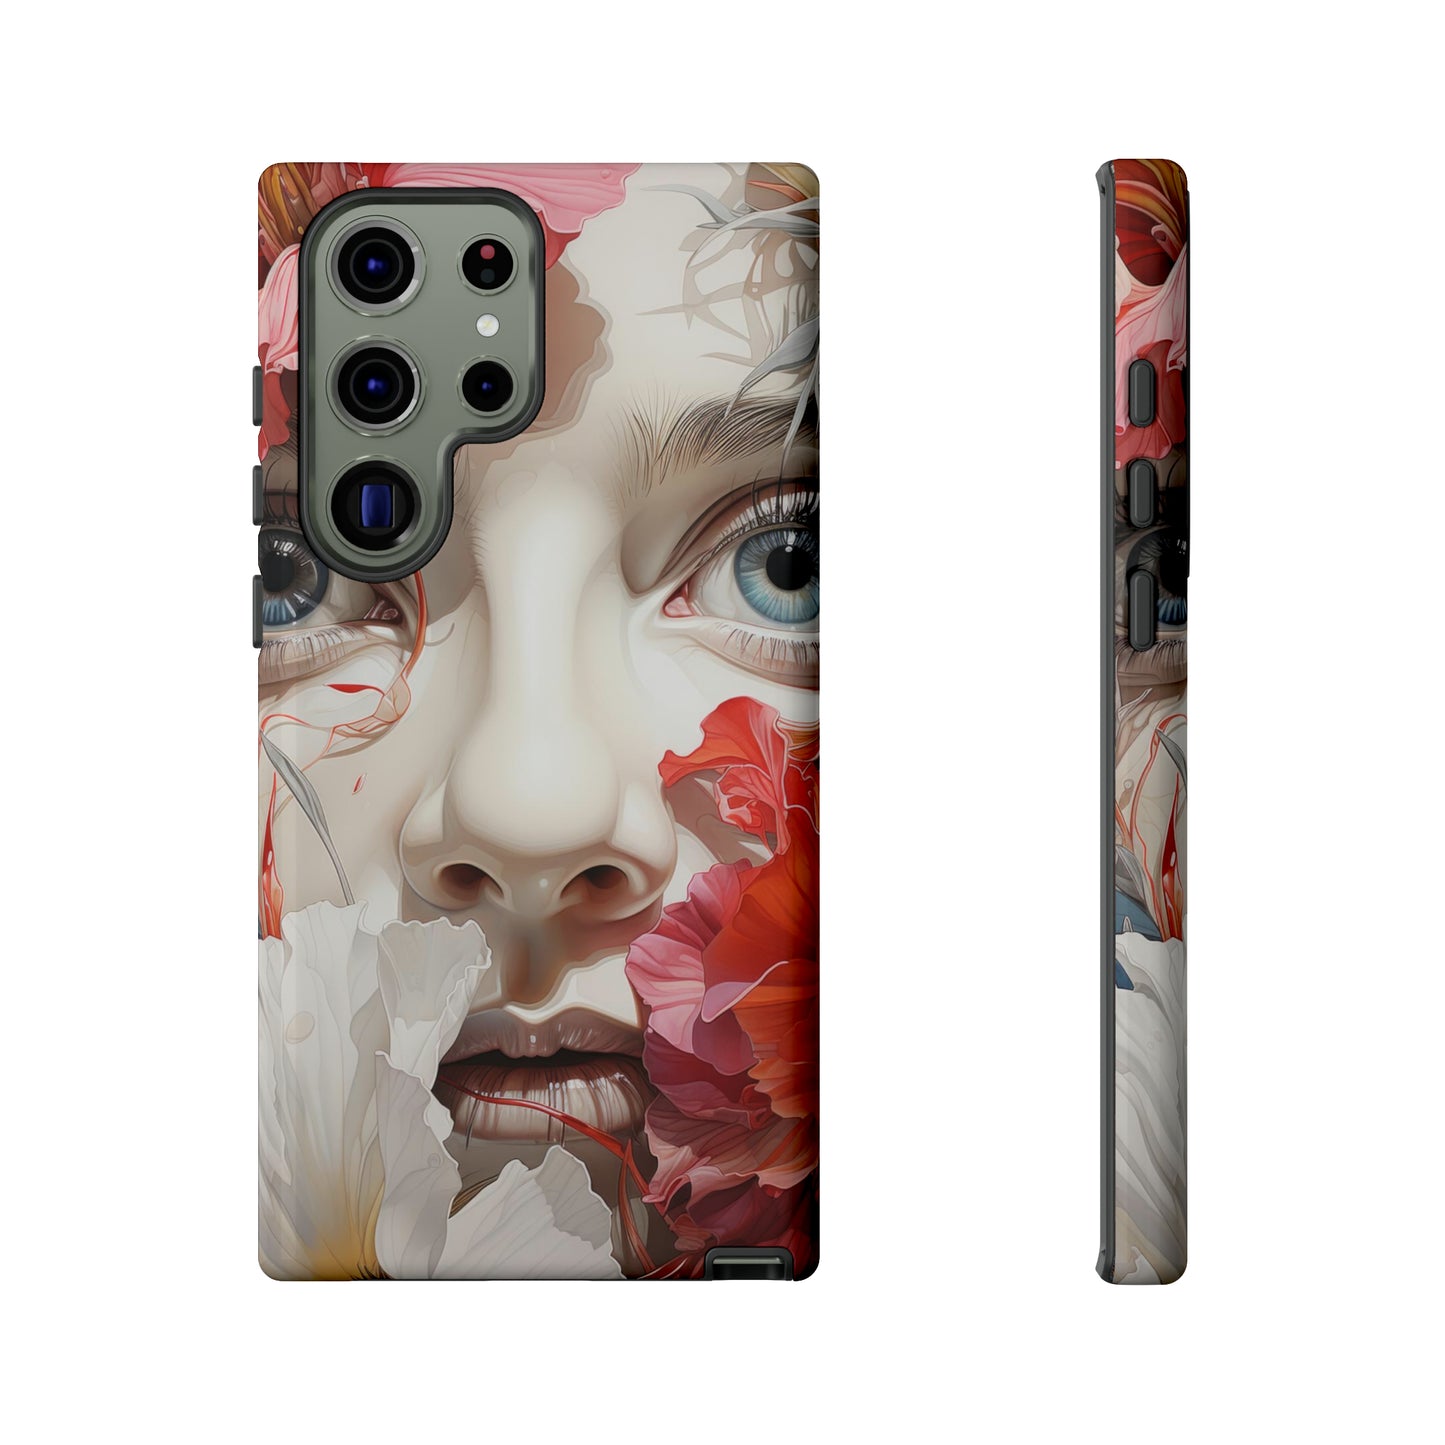 Pale-Faced Woman Floral Escape Protective Phone Case - Vibrant Artistry for iPhone, Samsung, Pixel